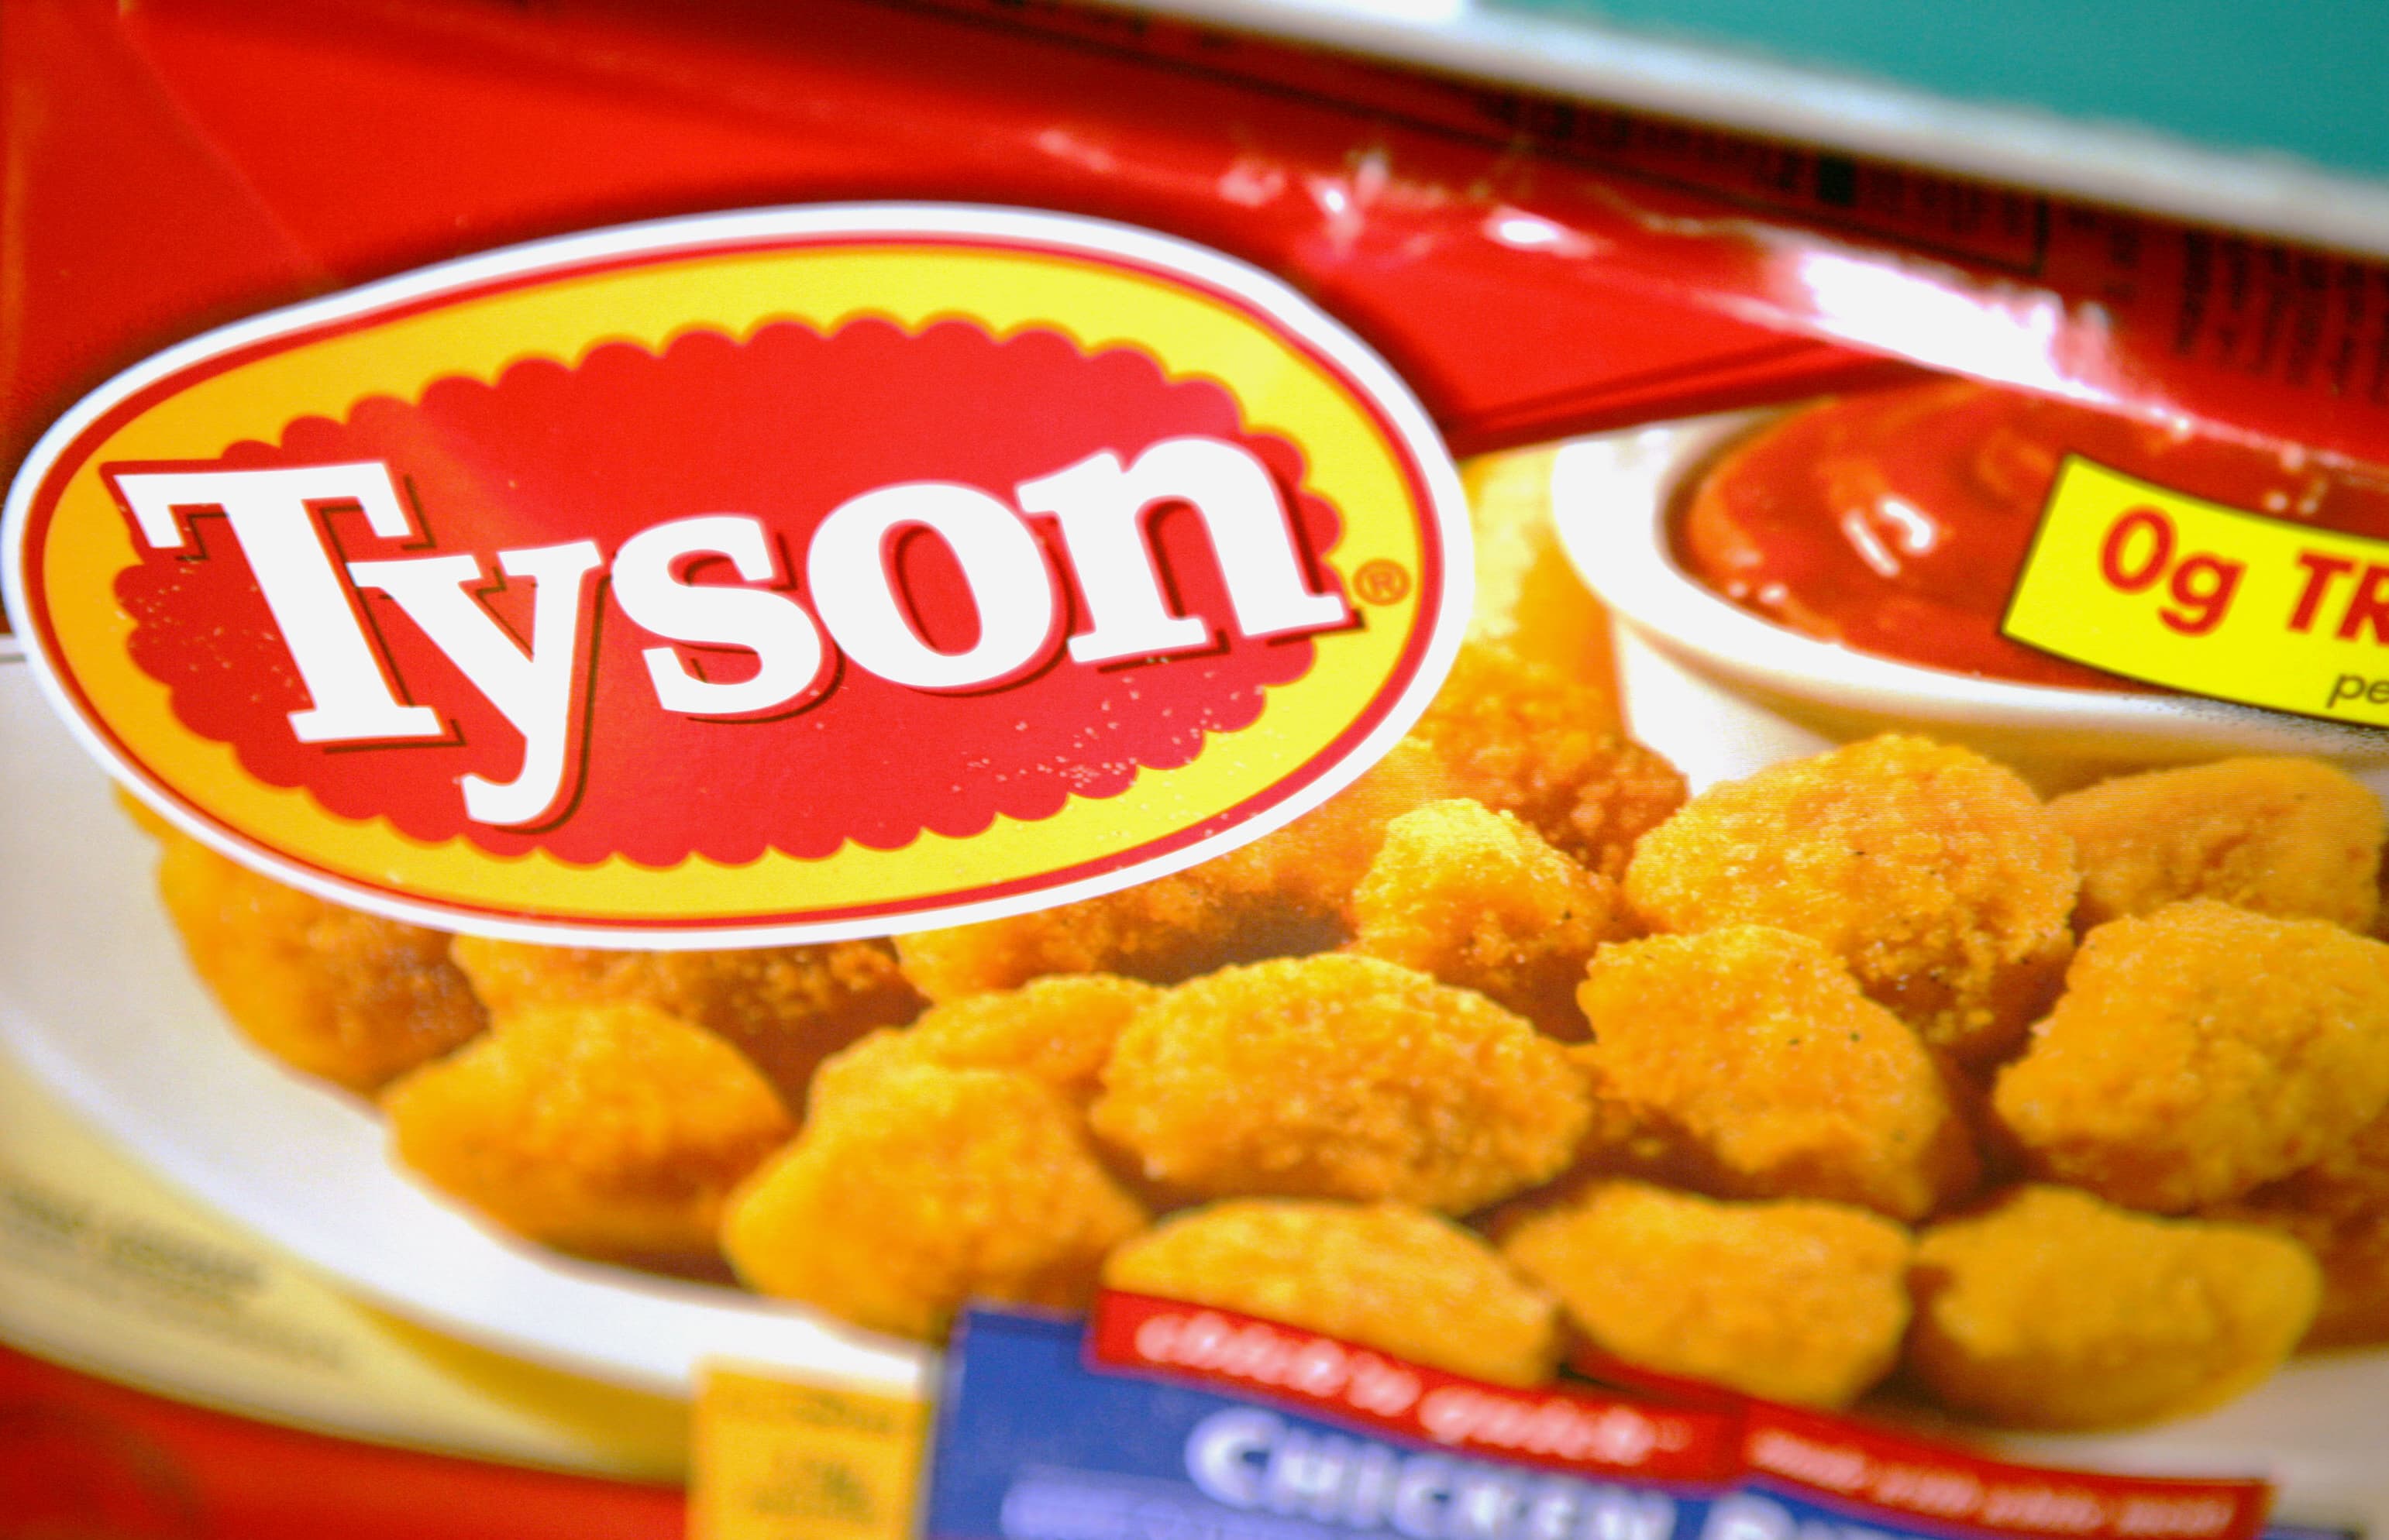 Tyson Foods recalls almost 12 million pounds of chicken strips over